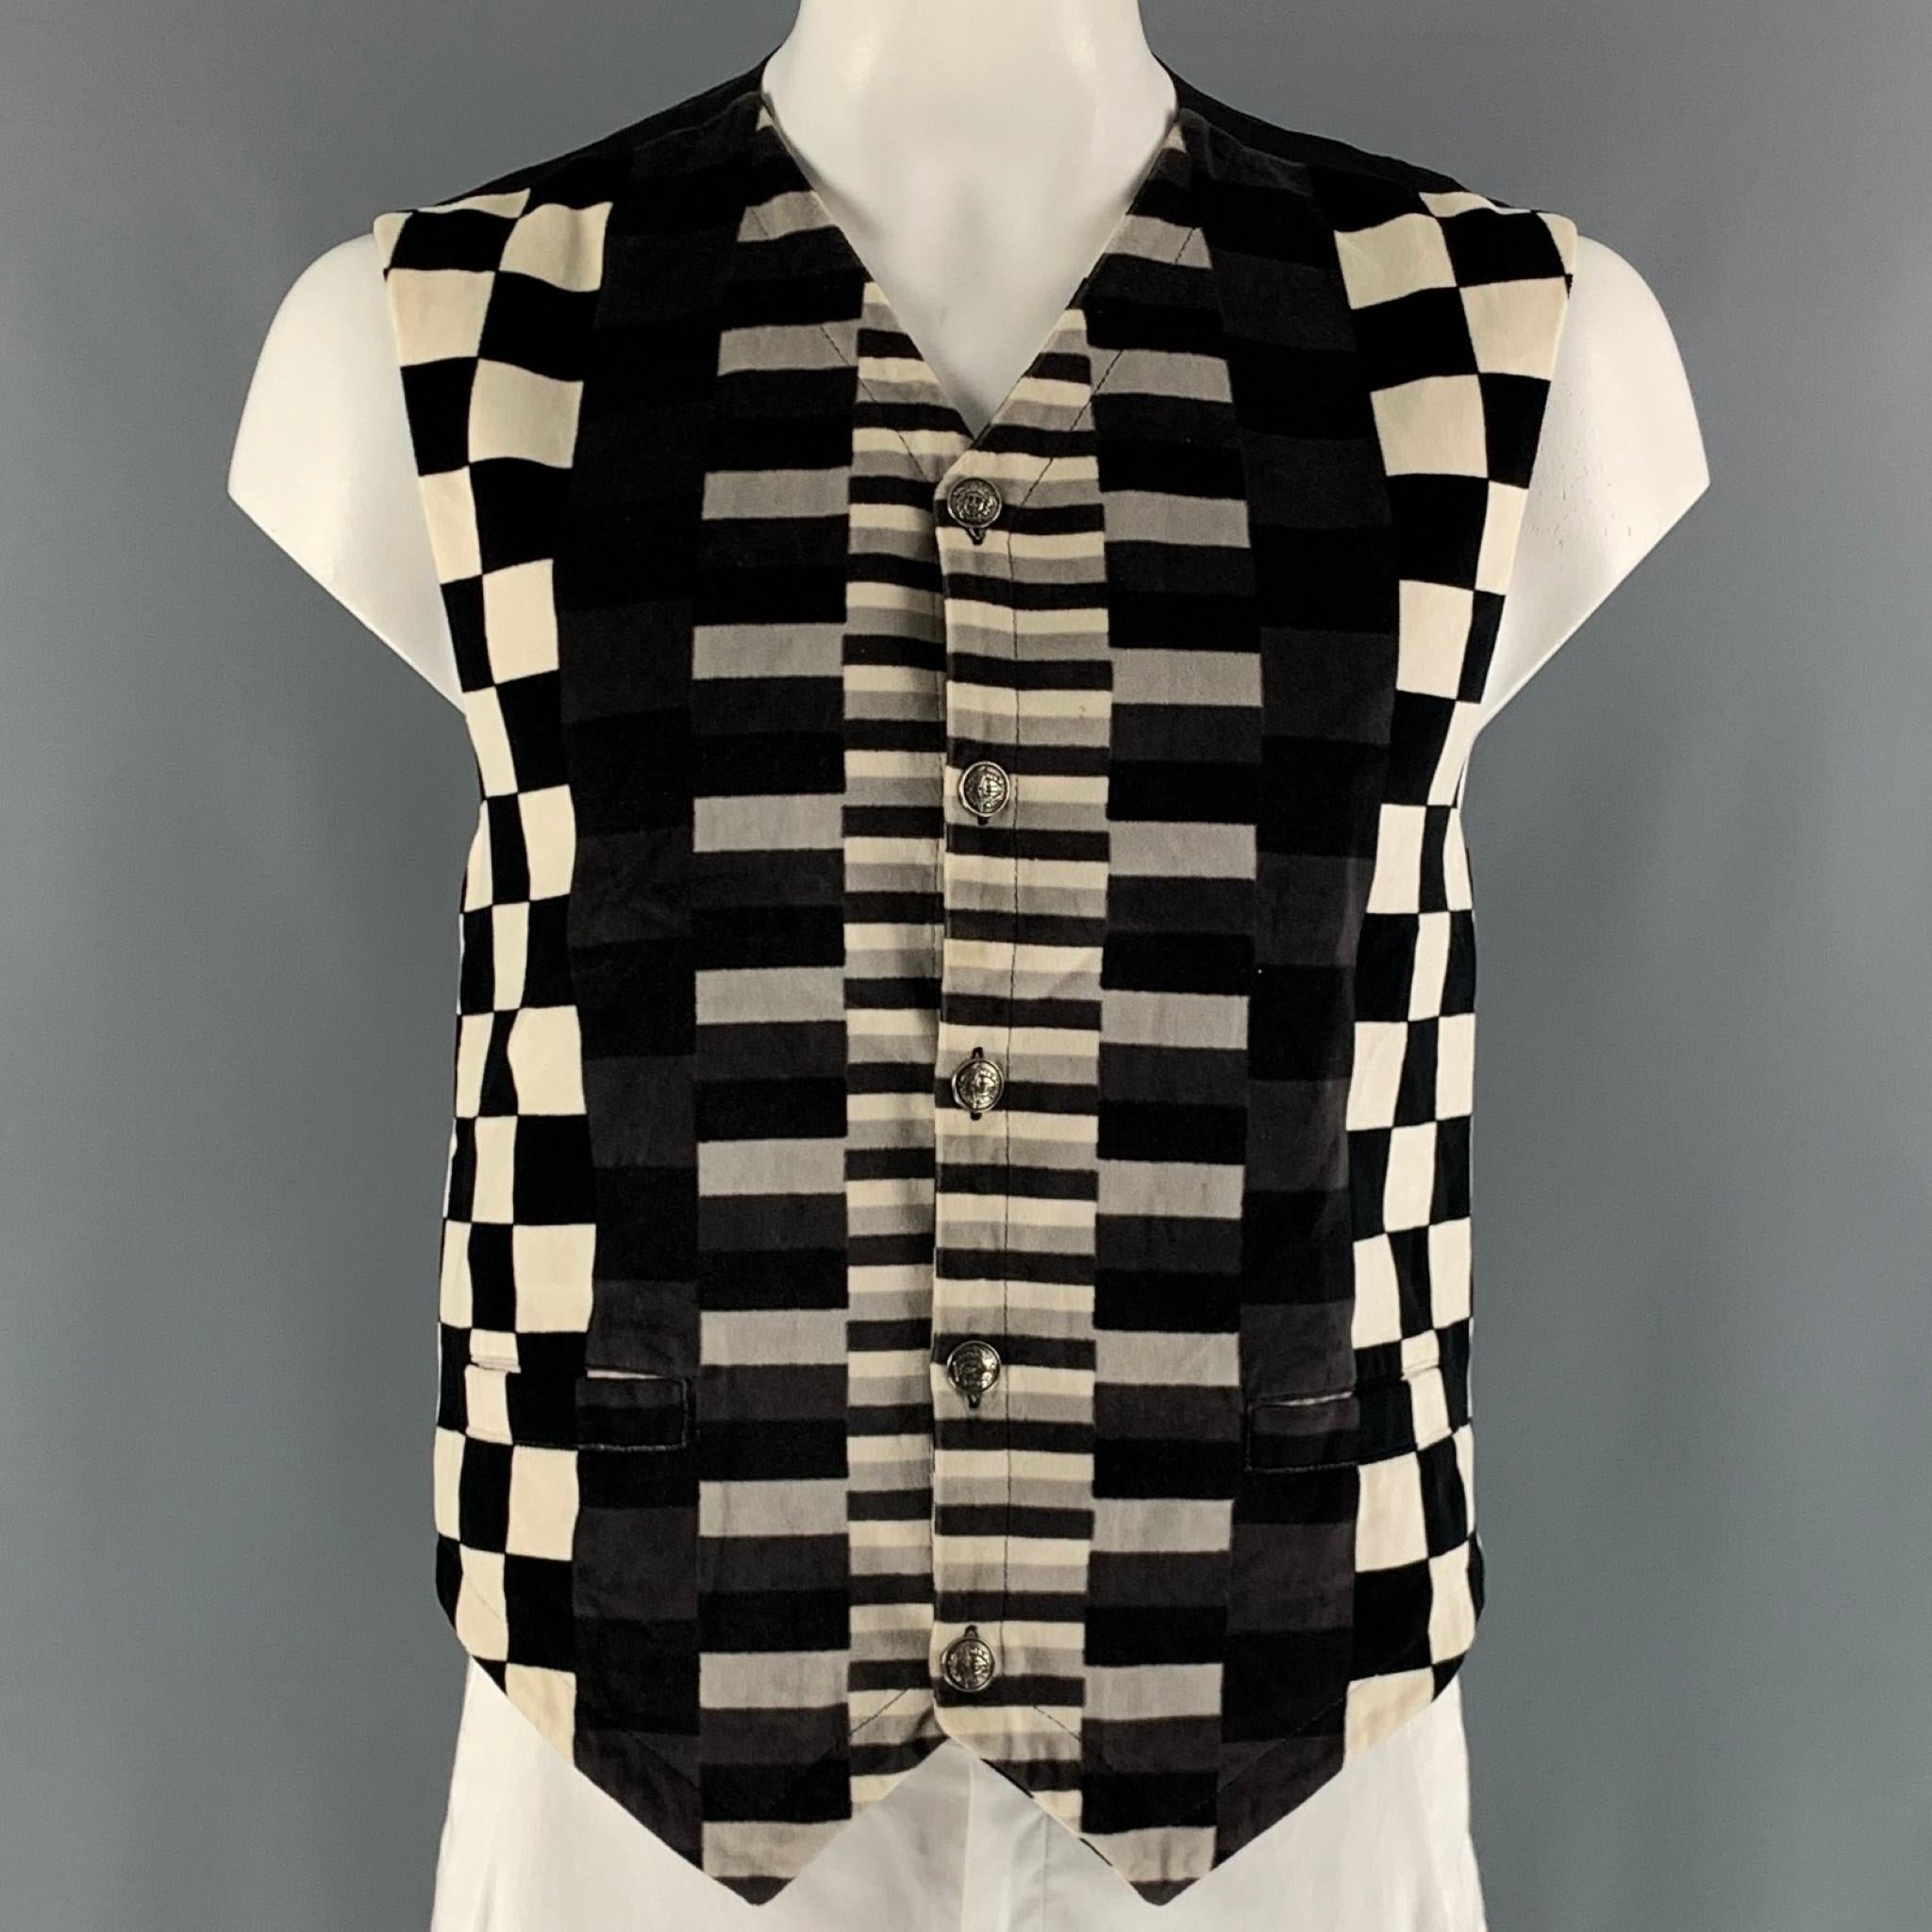 VERSACE JEANS COUTURE vest comes in a black and white checkered cotton woven material featuring slit pockets, silver medusa buttons, and a buttoned closure. Made in Italy.

Very Good Pre-Owned Condition. Minor mark at front left panel.
Marked: